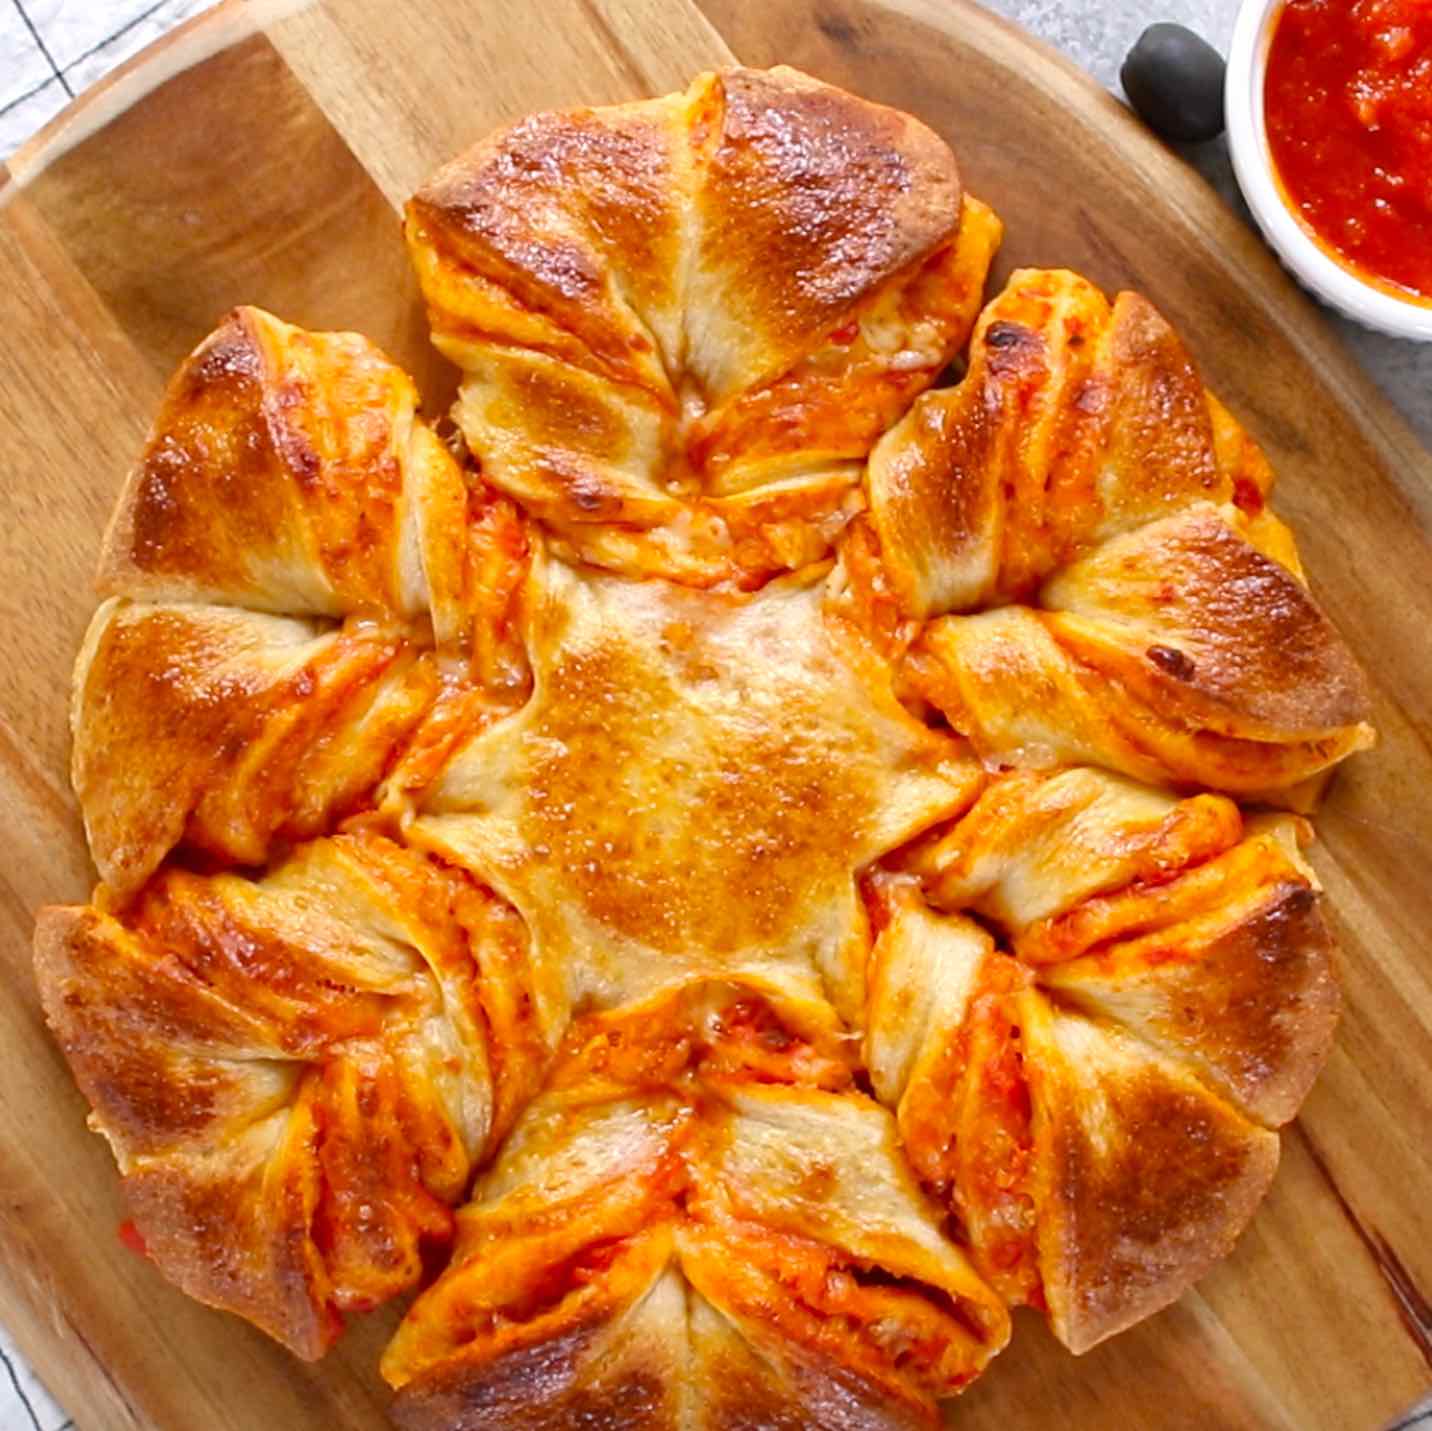 This is one of the easiest pizza recipes that can be prepared in 5 minutes. Put it in the oven and wait for 15-20 minutes and you will get a warm, cheesy and pull apart pizza.  All you need is only 5 ingredients: refrigerated pizza dough, marinara sauce, shredded mozzarella, egg and water. The perfect snack, lunch or quick dinner. 